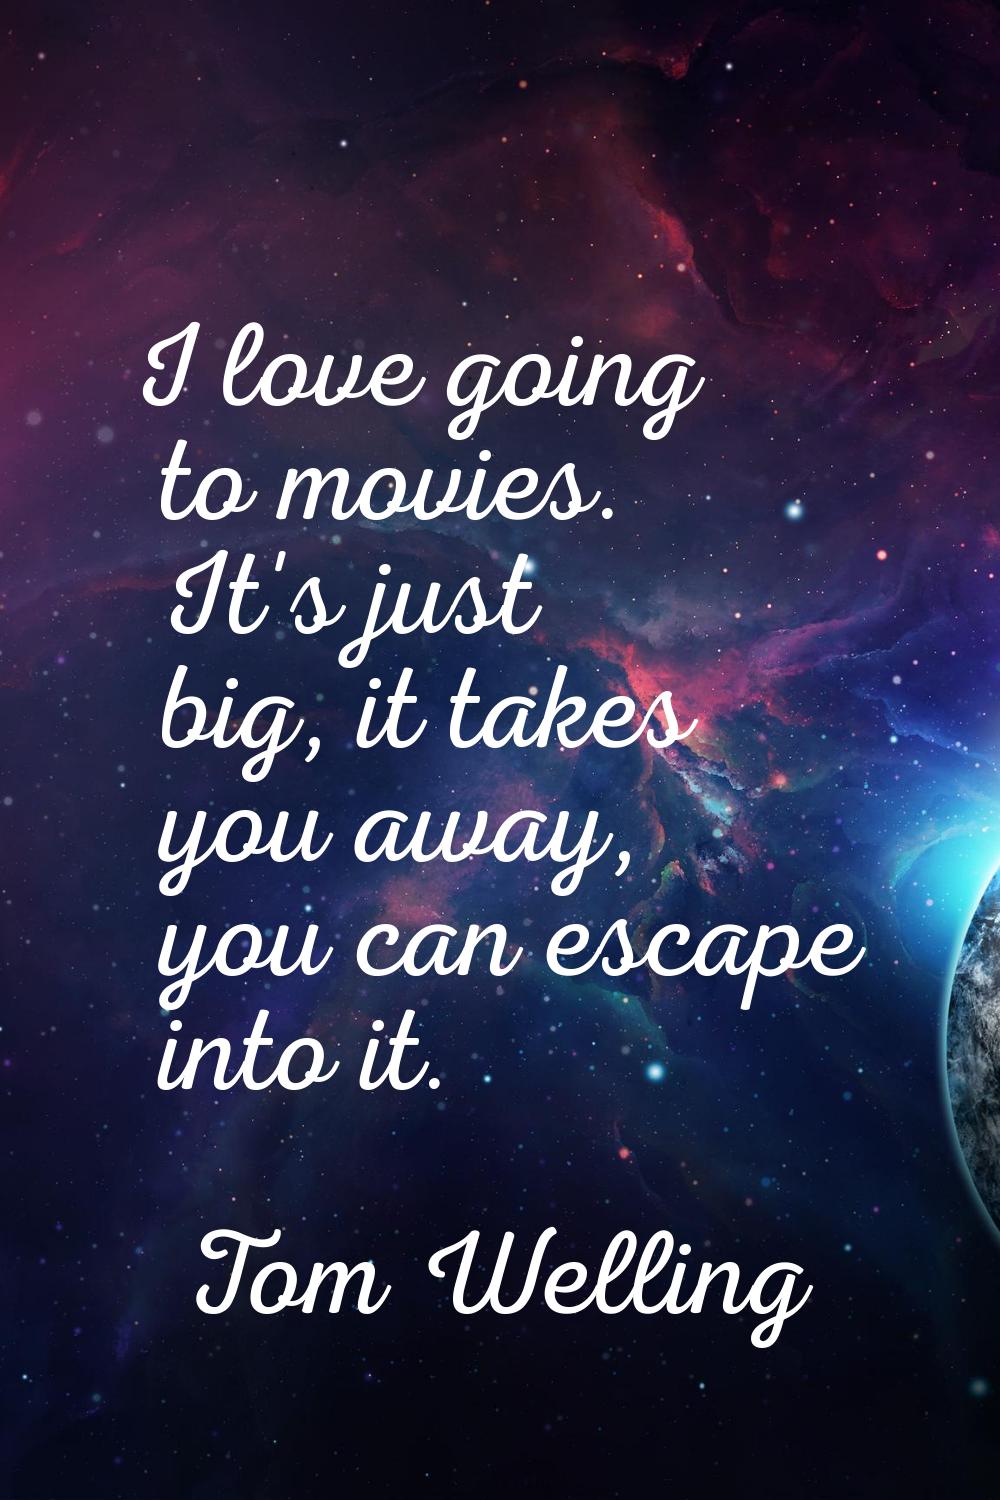 I love going to movies. It's just big, it takes you away, you can escape into it.